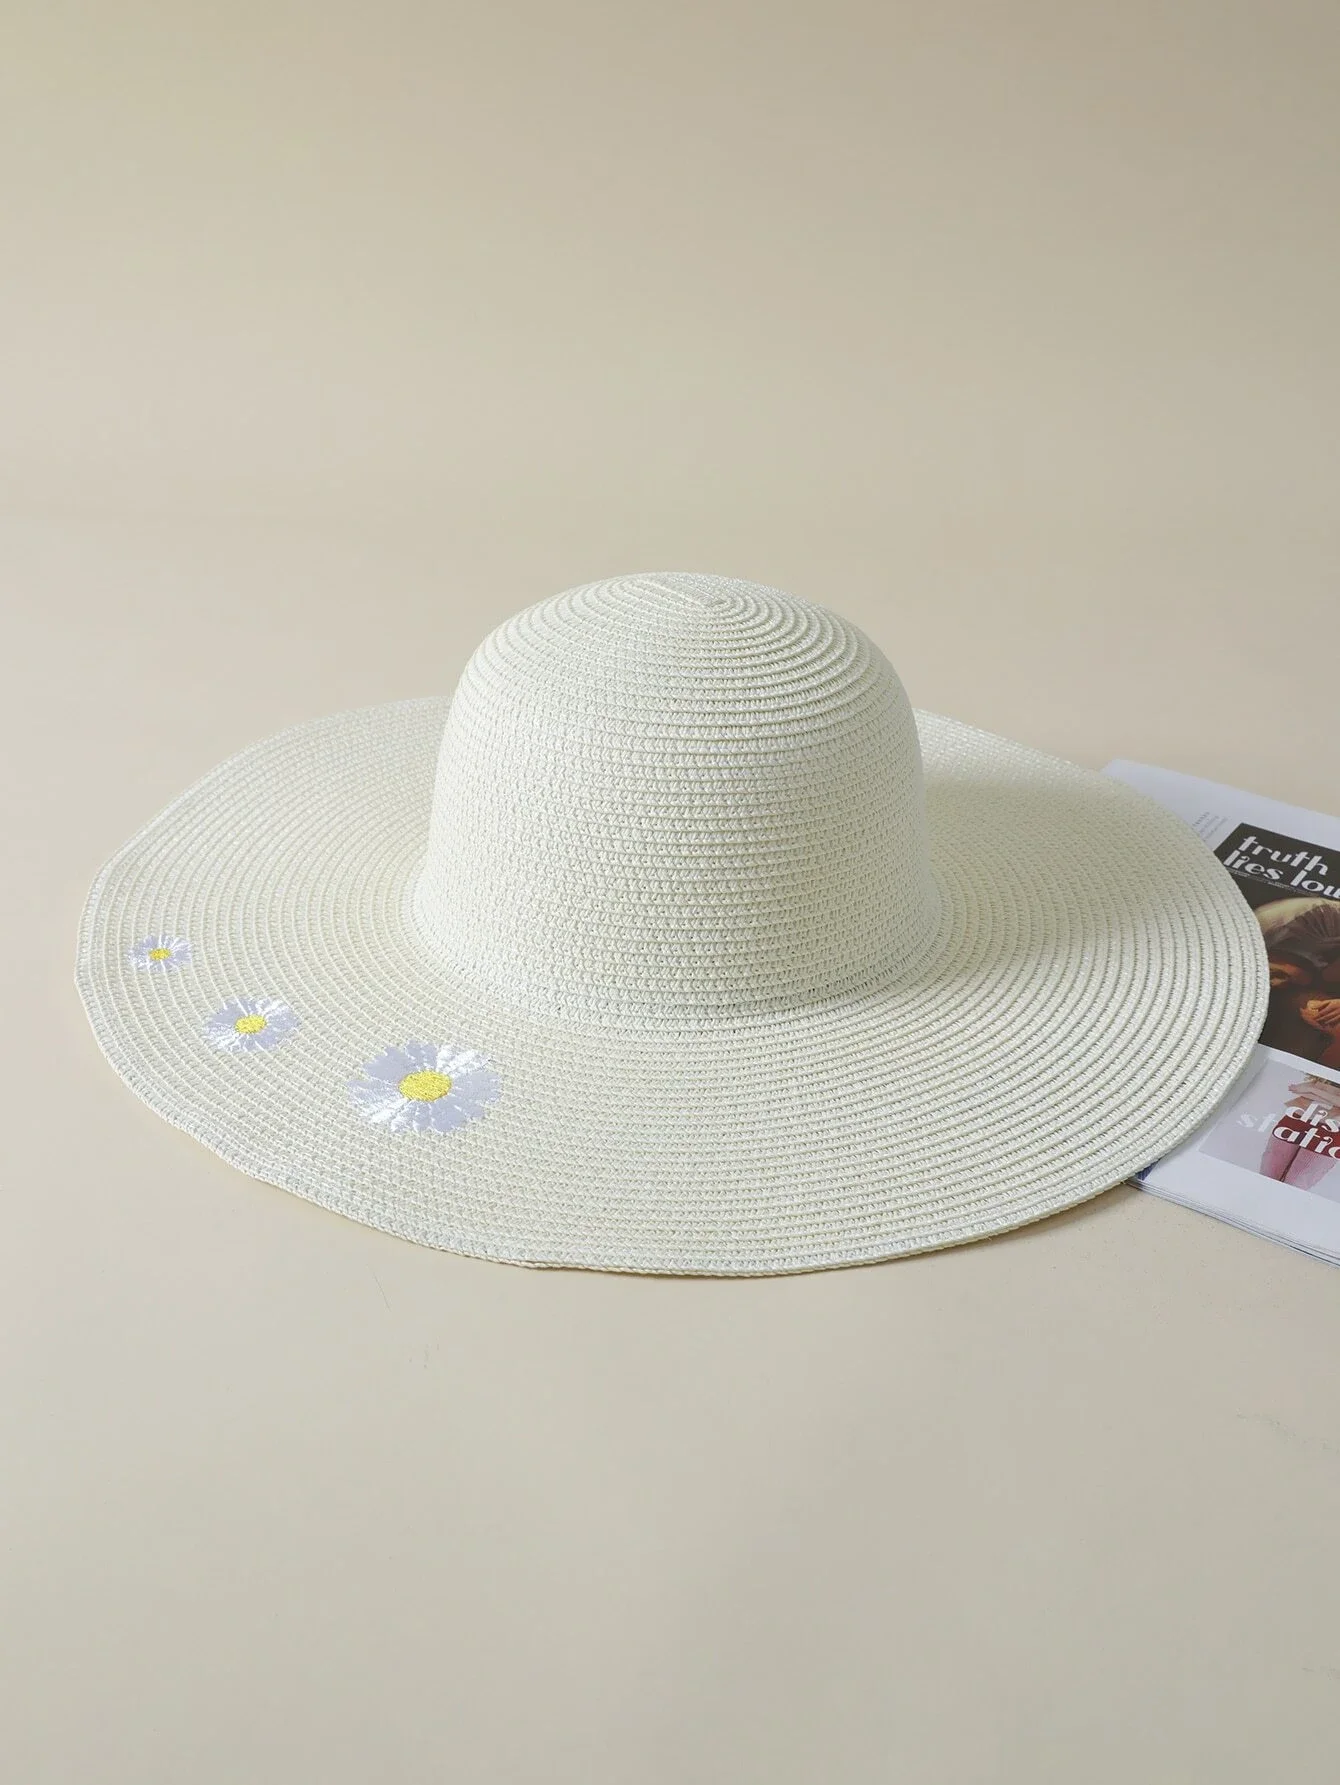 

Hats gorras sombreros capshat Floral Embroidery Straw Hat beach